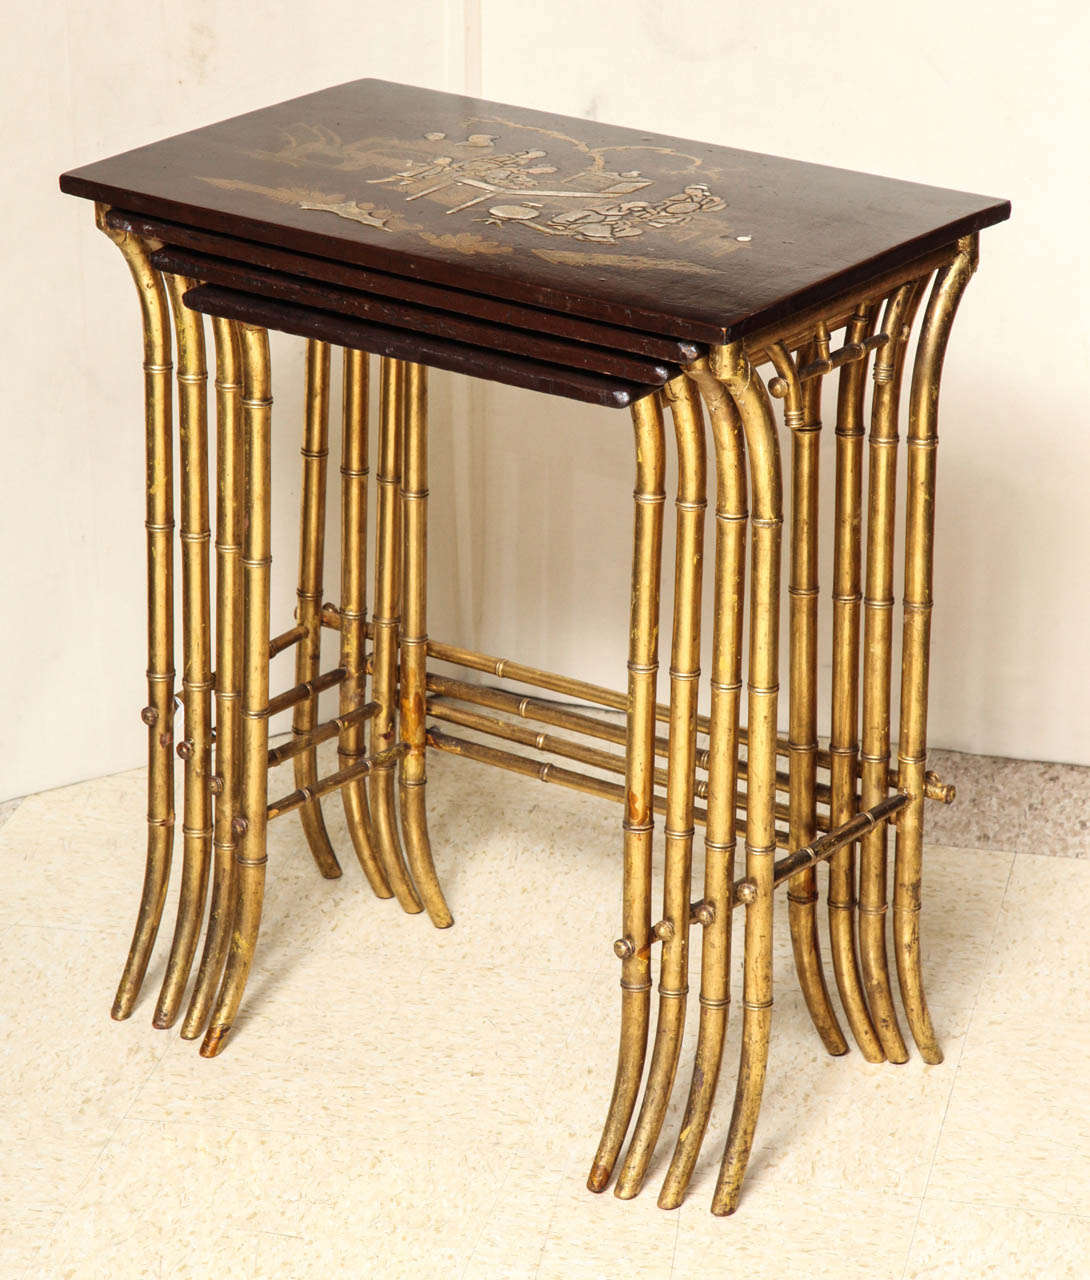 French Chinoiserie Set of Four Japanned Lacquer Top Nesting Tables with Bamboo Legs